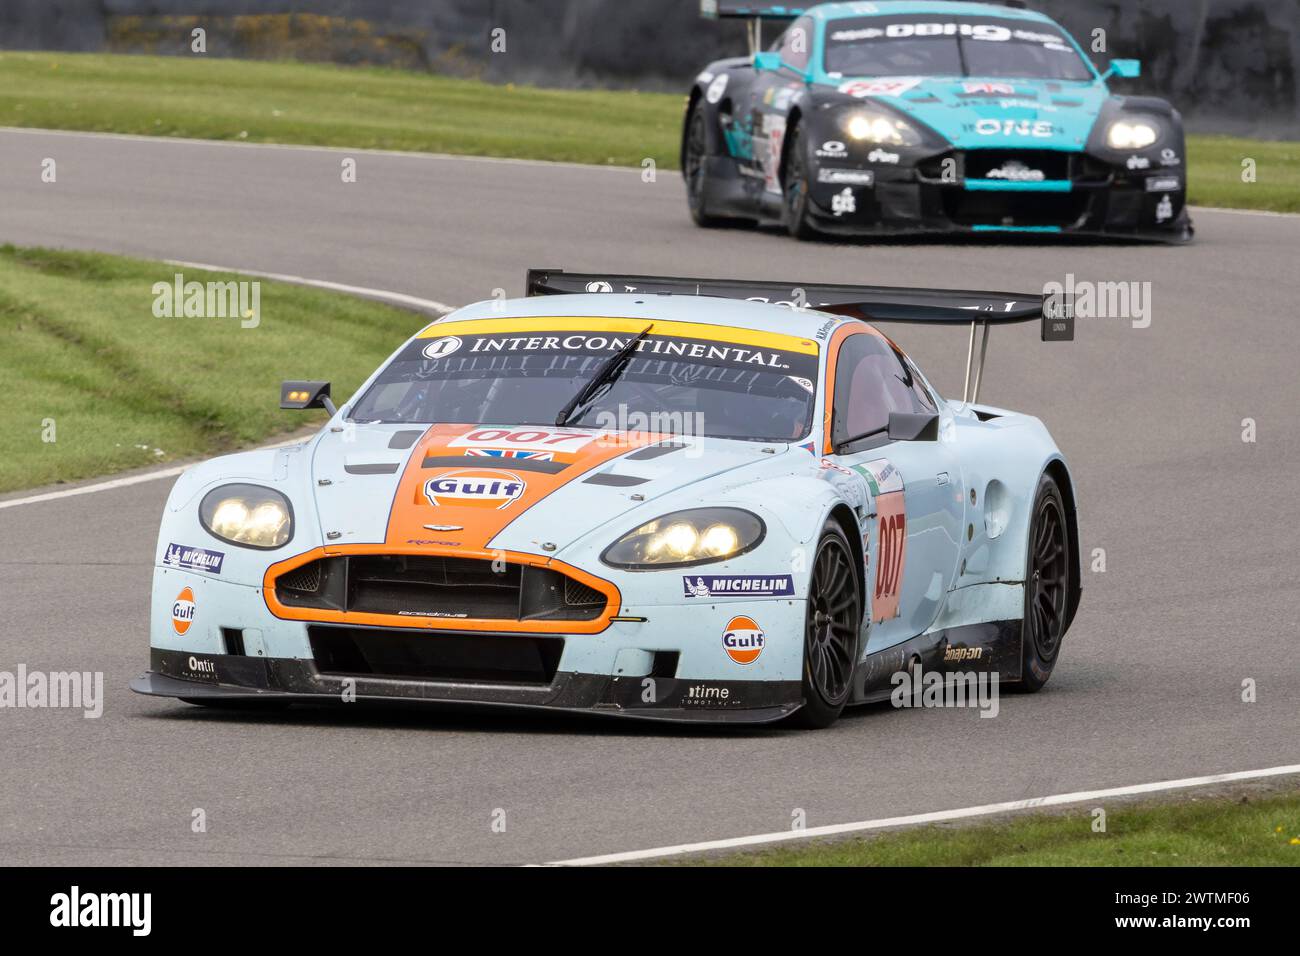 2006 Aston Martin DBR9 007 GT1 endurance racer at the Goodwood 80th Members Meeting, Sussex, UK. Stock Photo